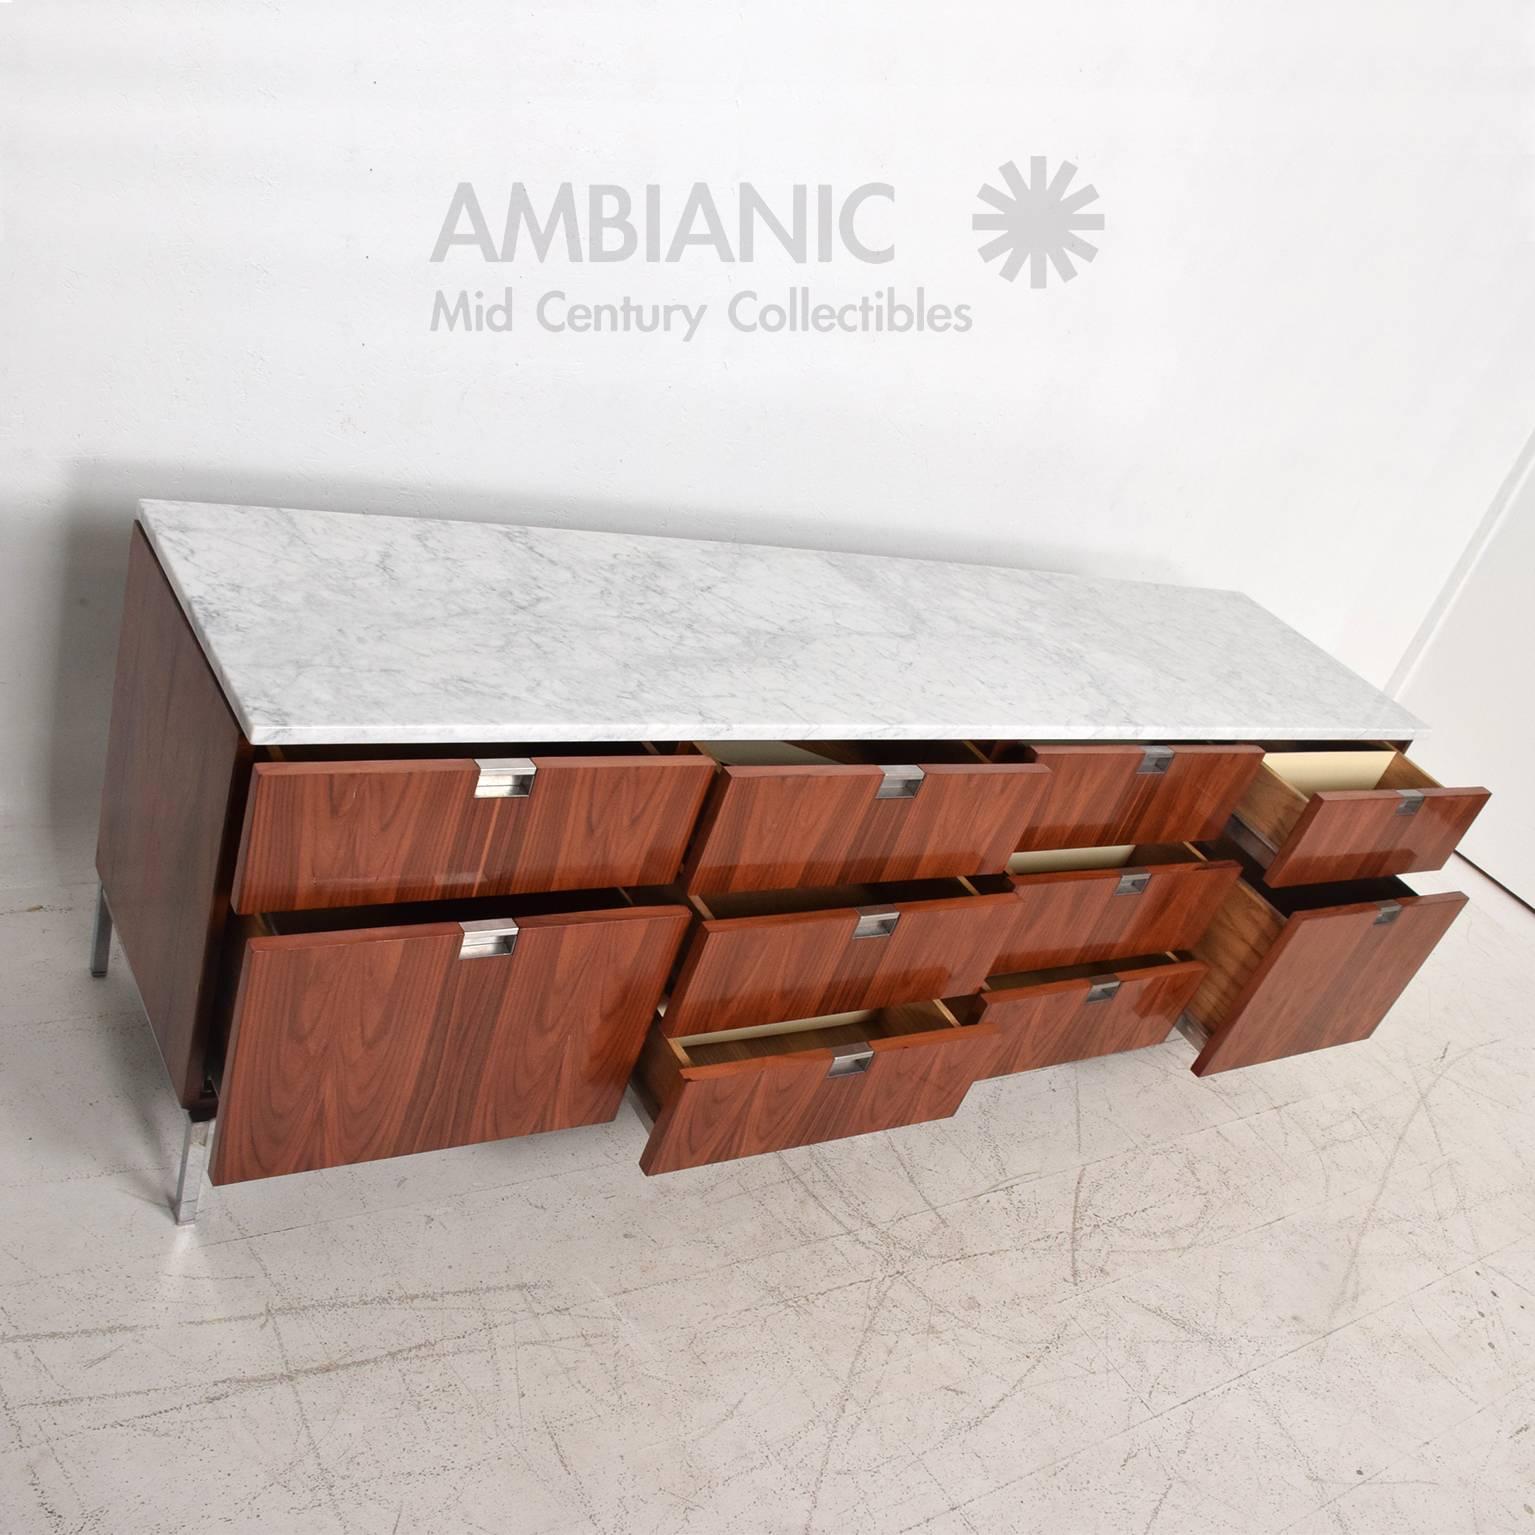 Mid-20th Century Florence Knoll Rosewood and Marble-Top Credenza, Mid-Century Modern